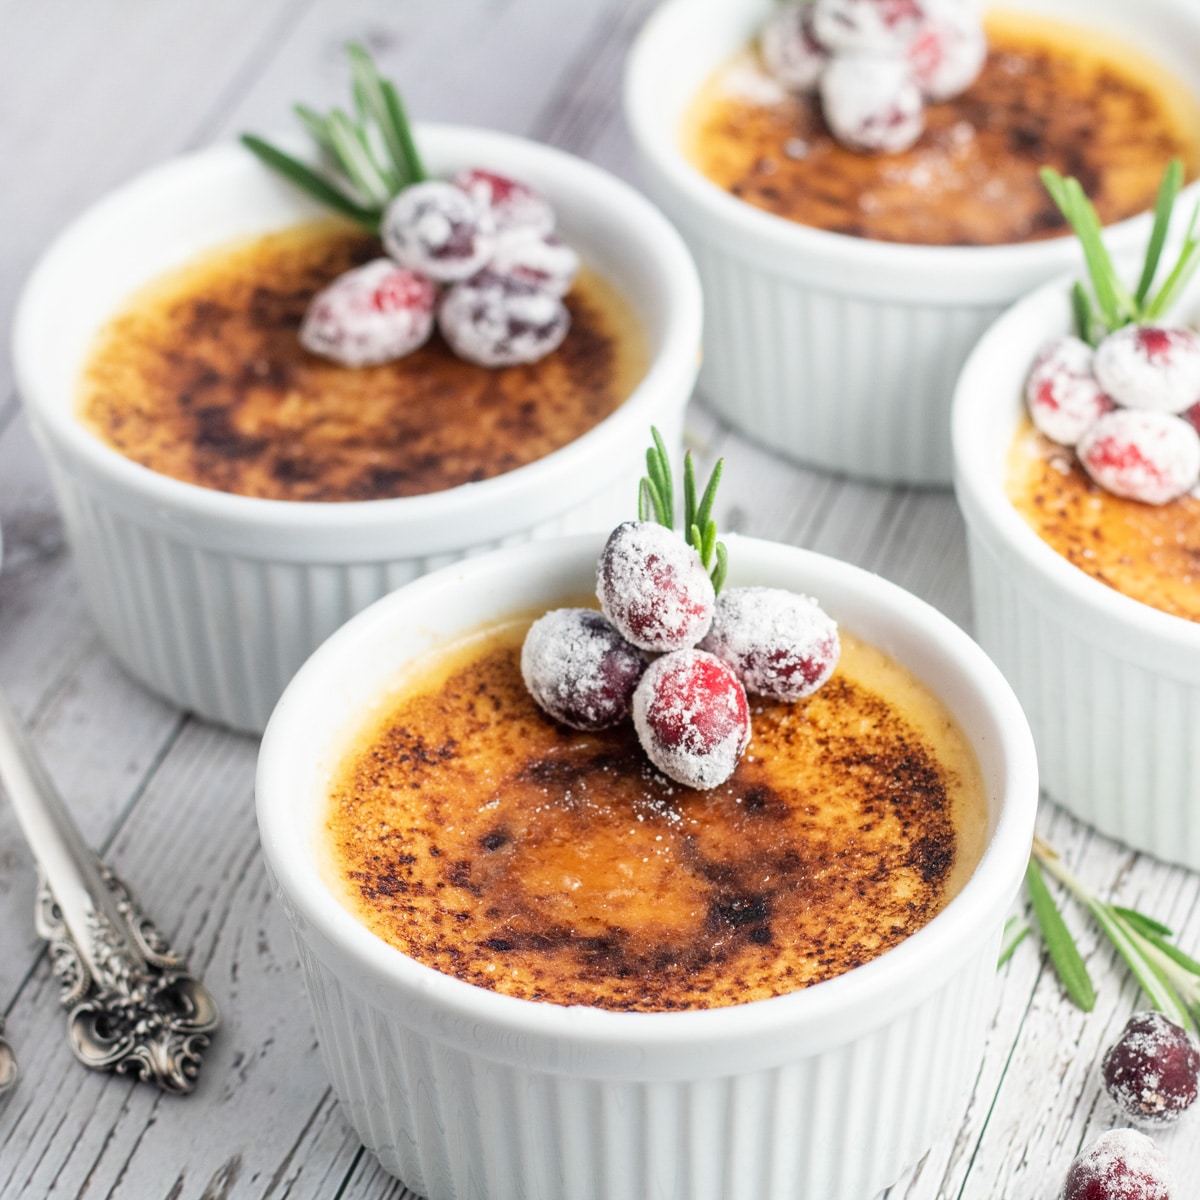 Toasted eggnog creme brulee in ramekins with sugared cranberries and a sprig of rosemary.